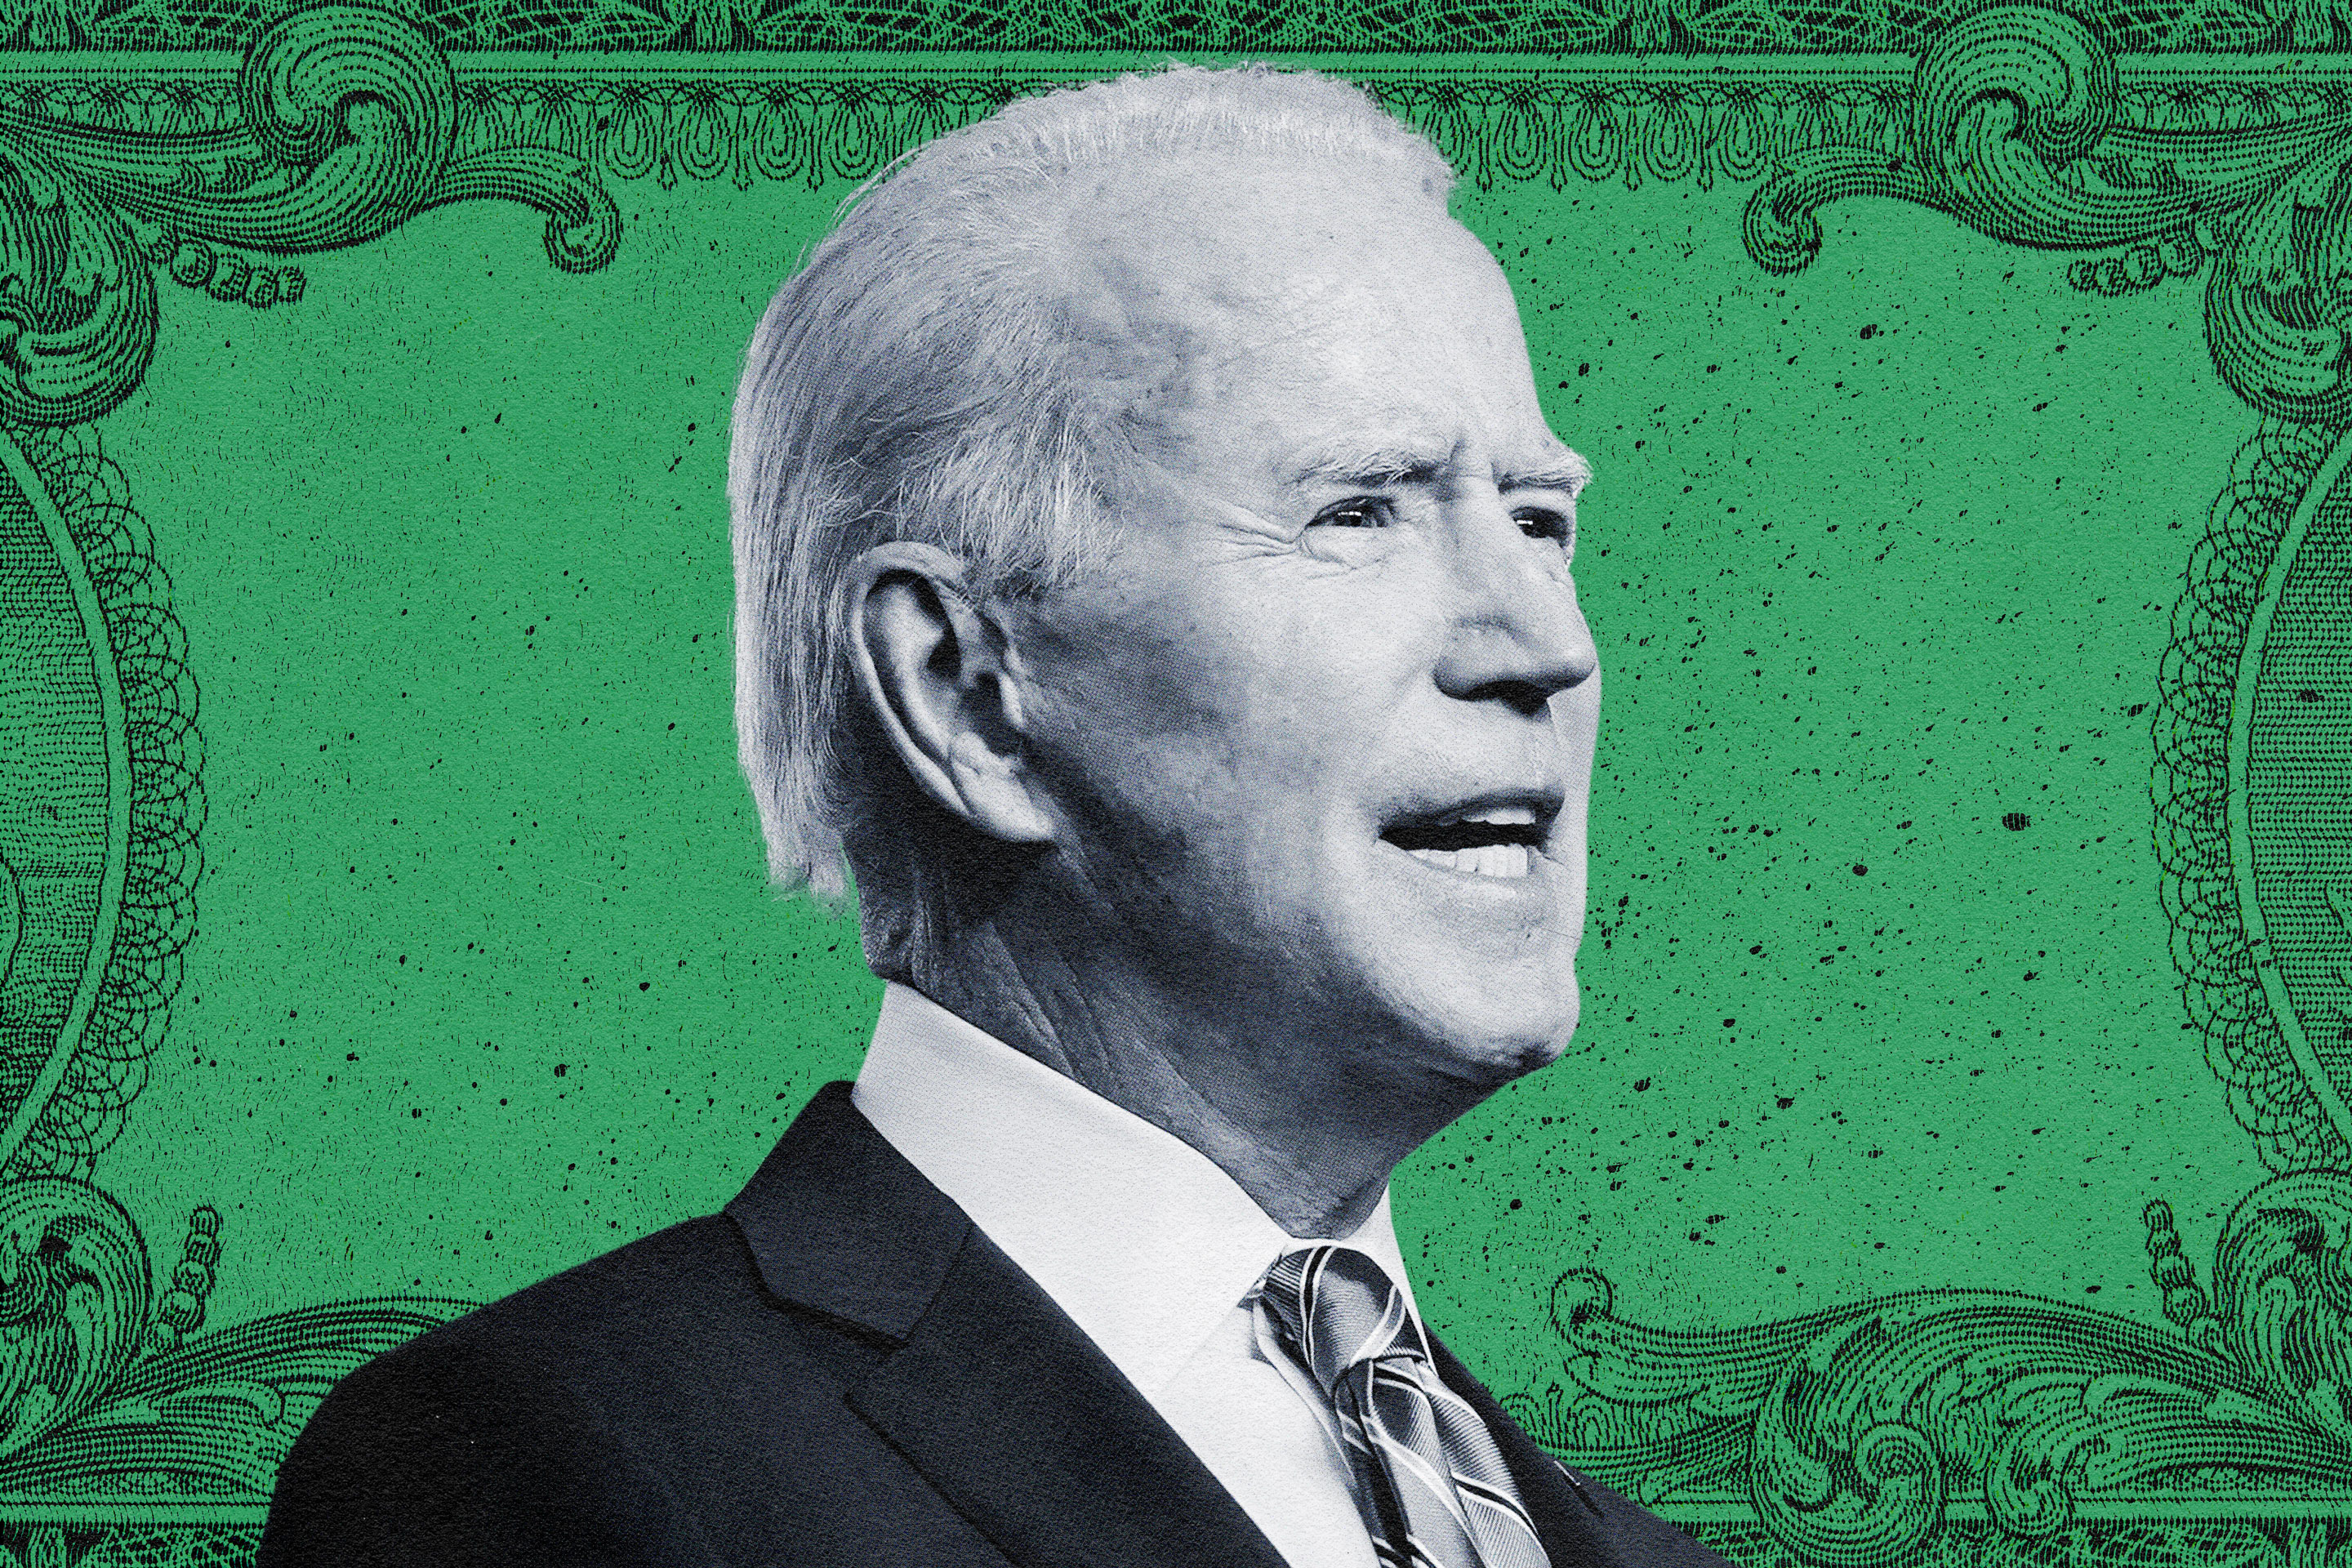 Joe Biden Is the President-Elect. Here's What It Means for Your Wallet